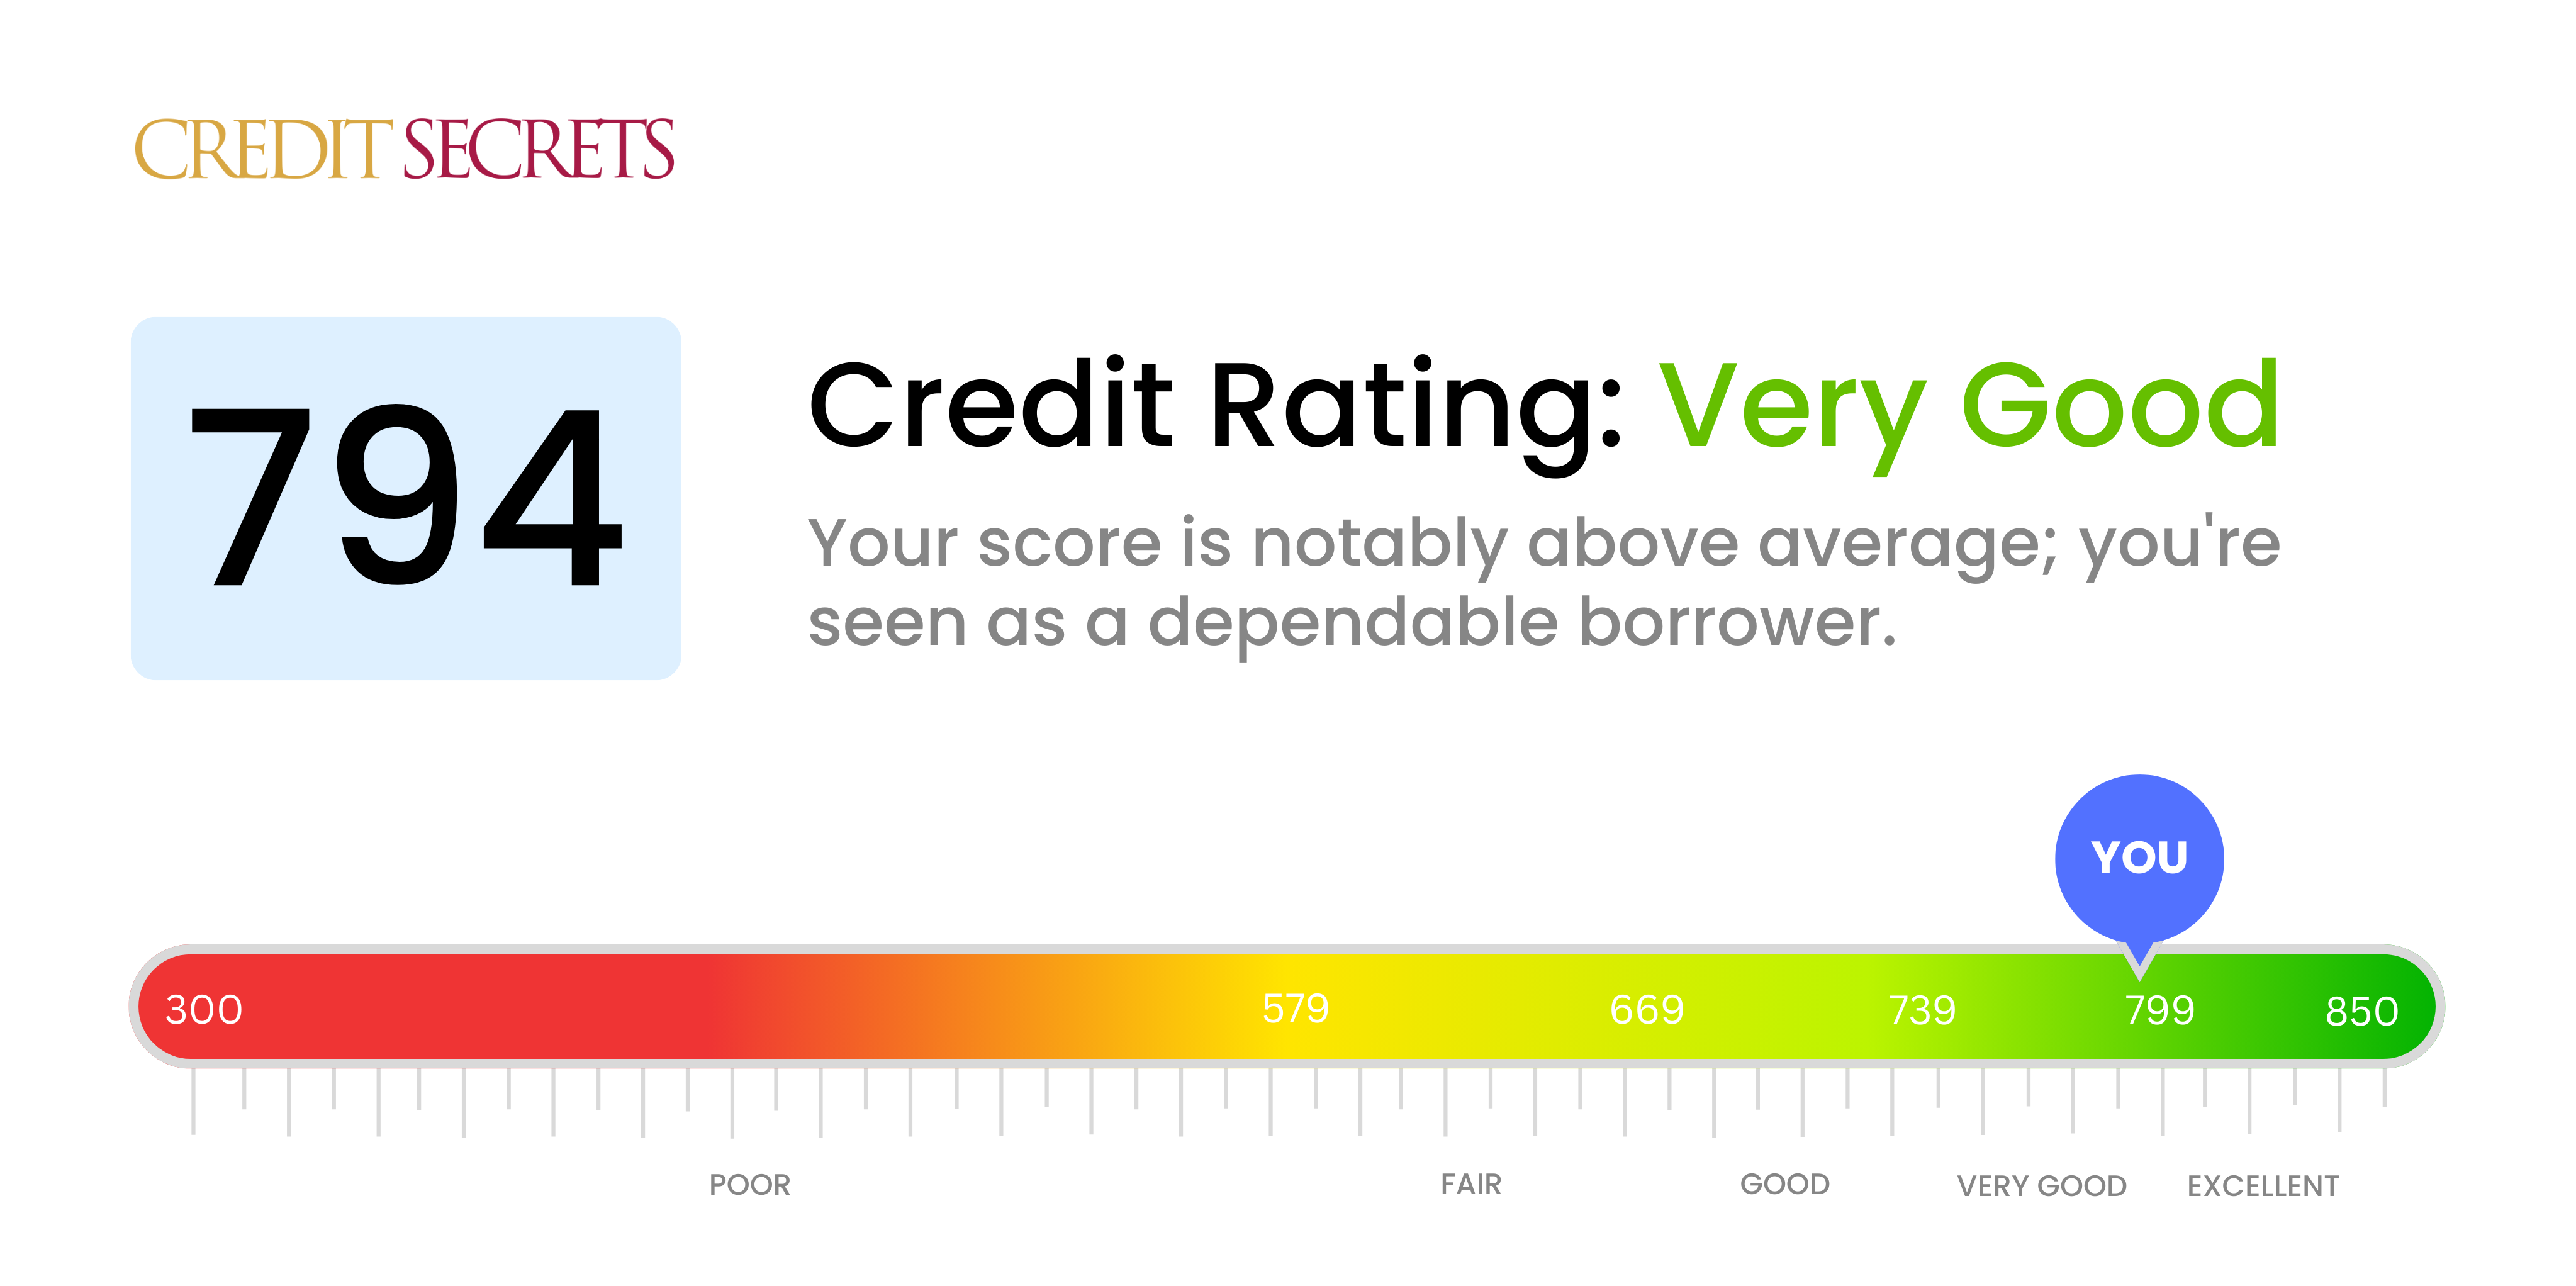 Is 794 a good credit score?